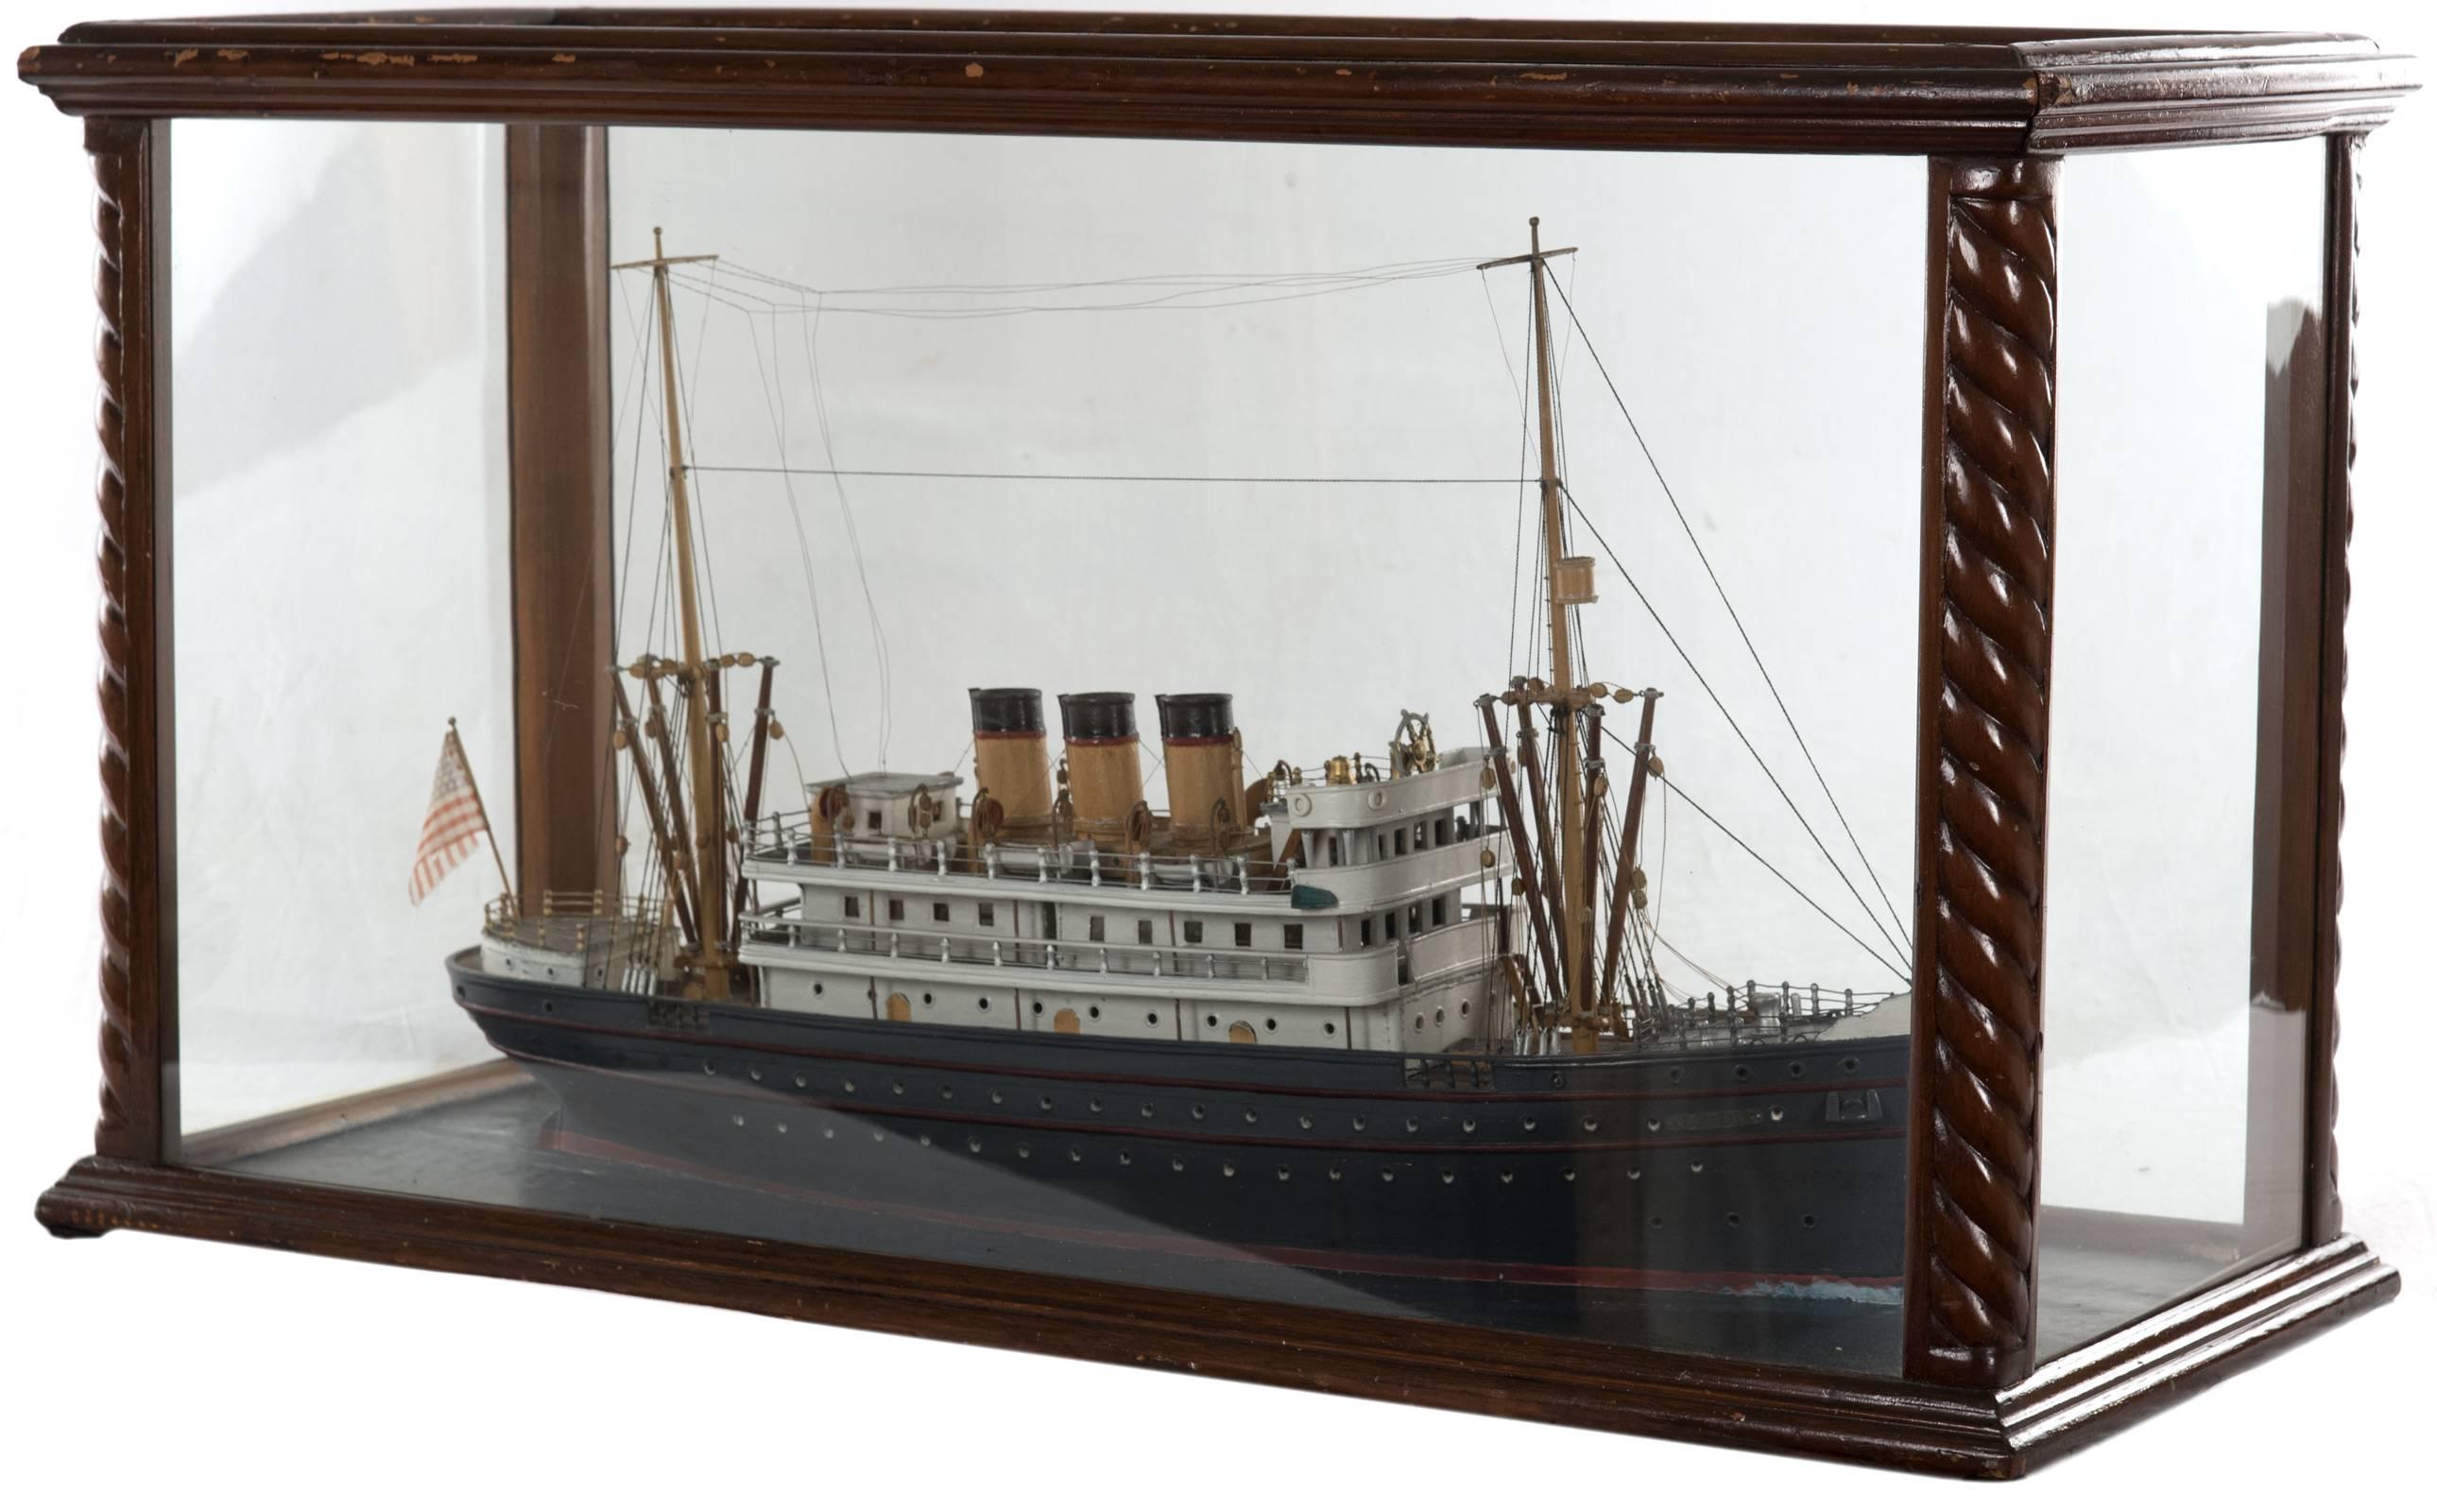 Carved and painted wooden model of American steamship, Neptune, with a blue and red painted hull and detailed rigging, two-masts and three steam stacks and American flag mounted on stern, housed in a custom built glass display case with turned wood